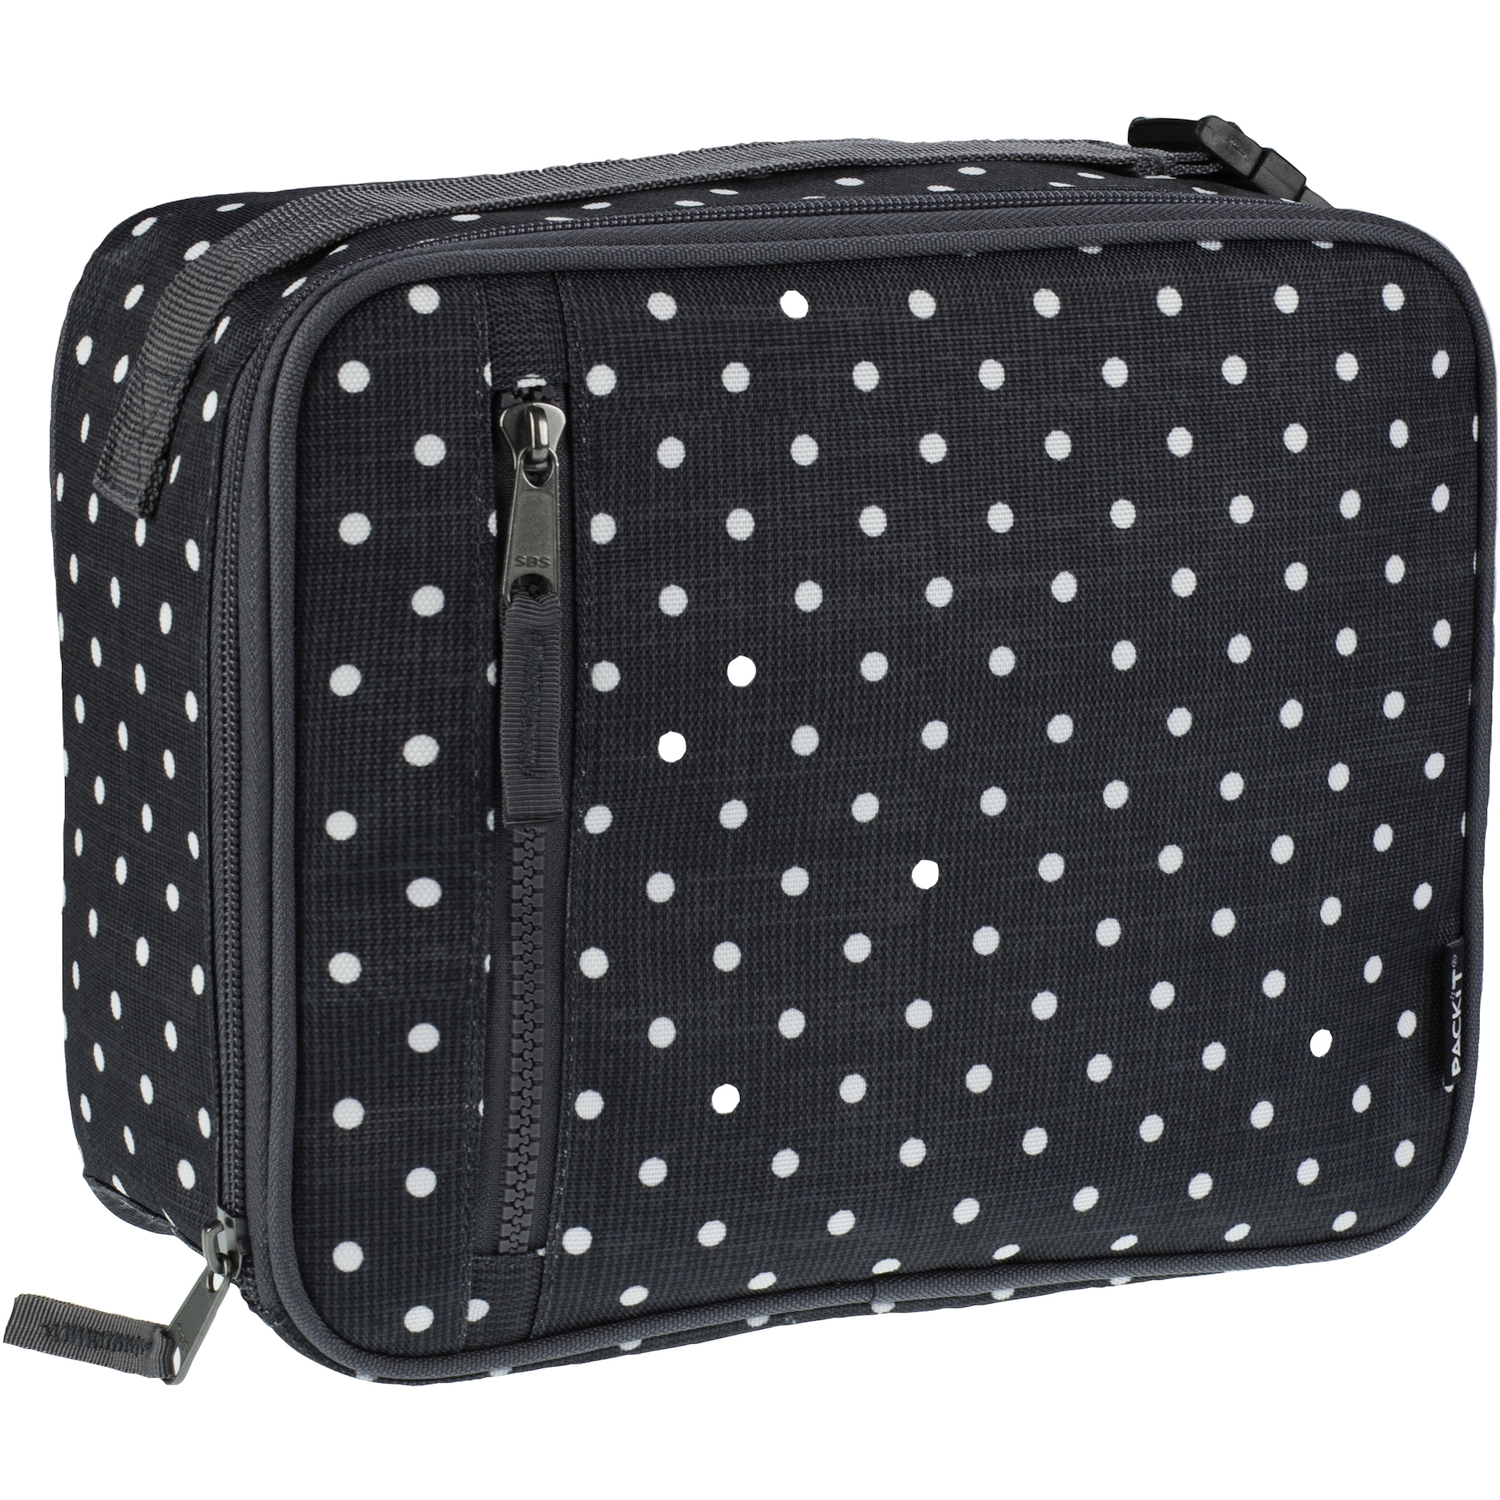     Classic Lunch Box Polka Dots, 4.5  (PACKiT PACKIT0037)